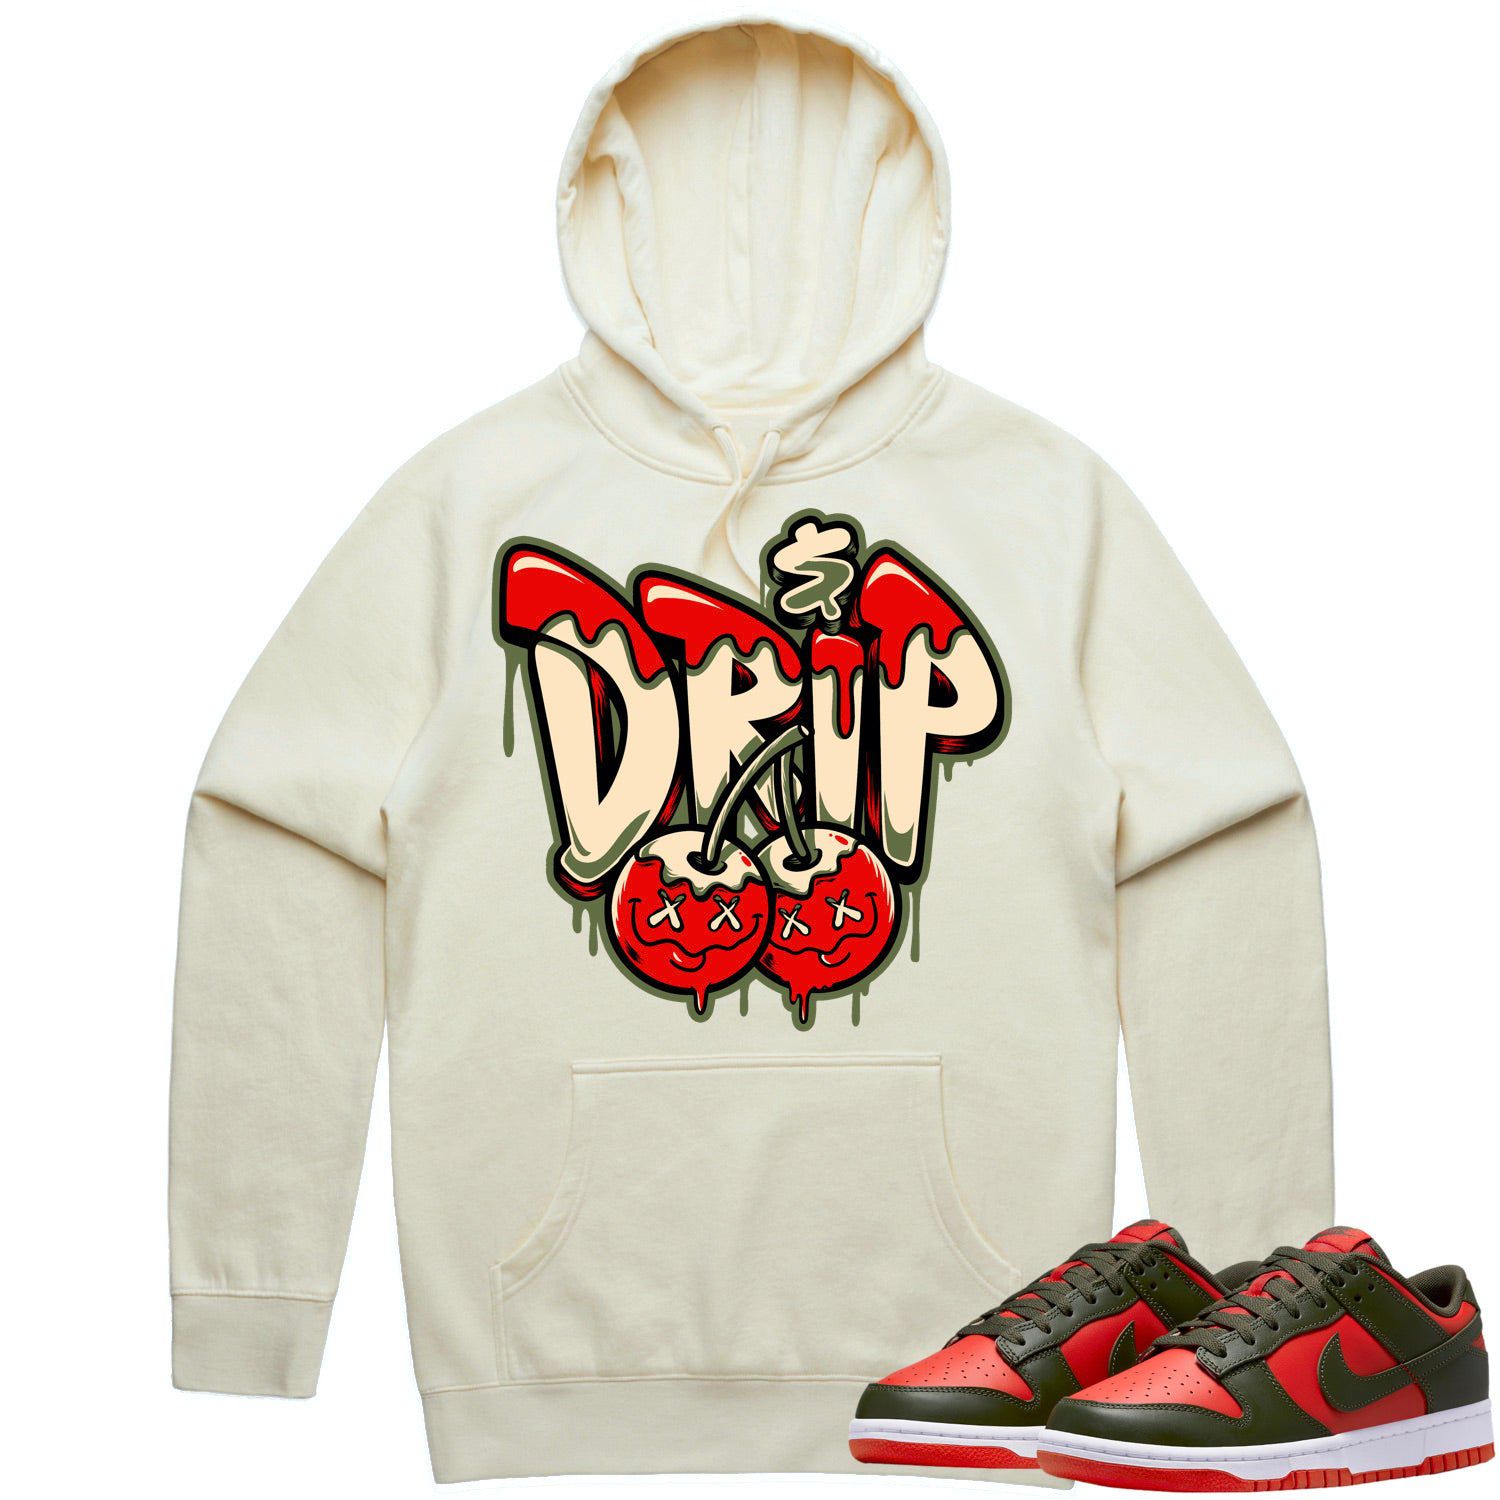 Mystic Red Dunks Hoodie - Olive Red Dunks Shirts - Olive Money Drip